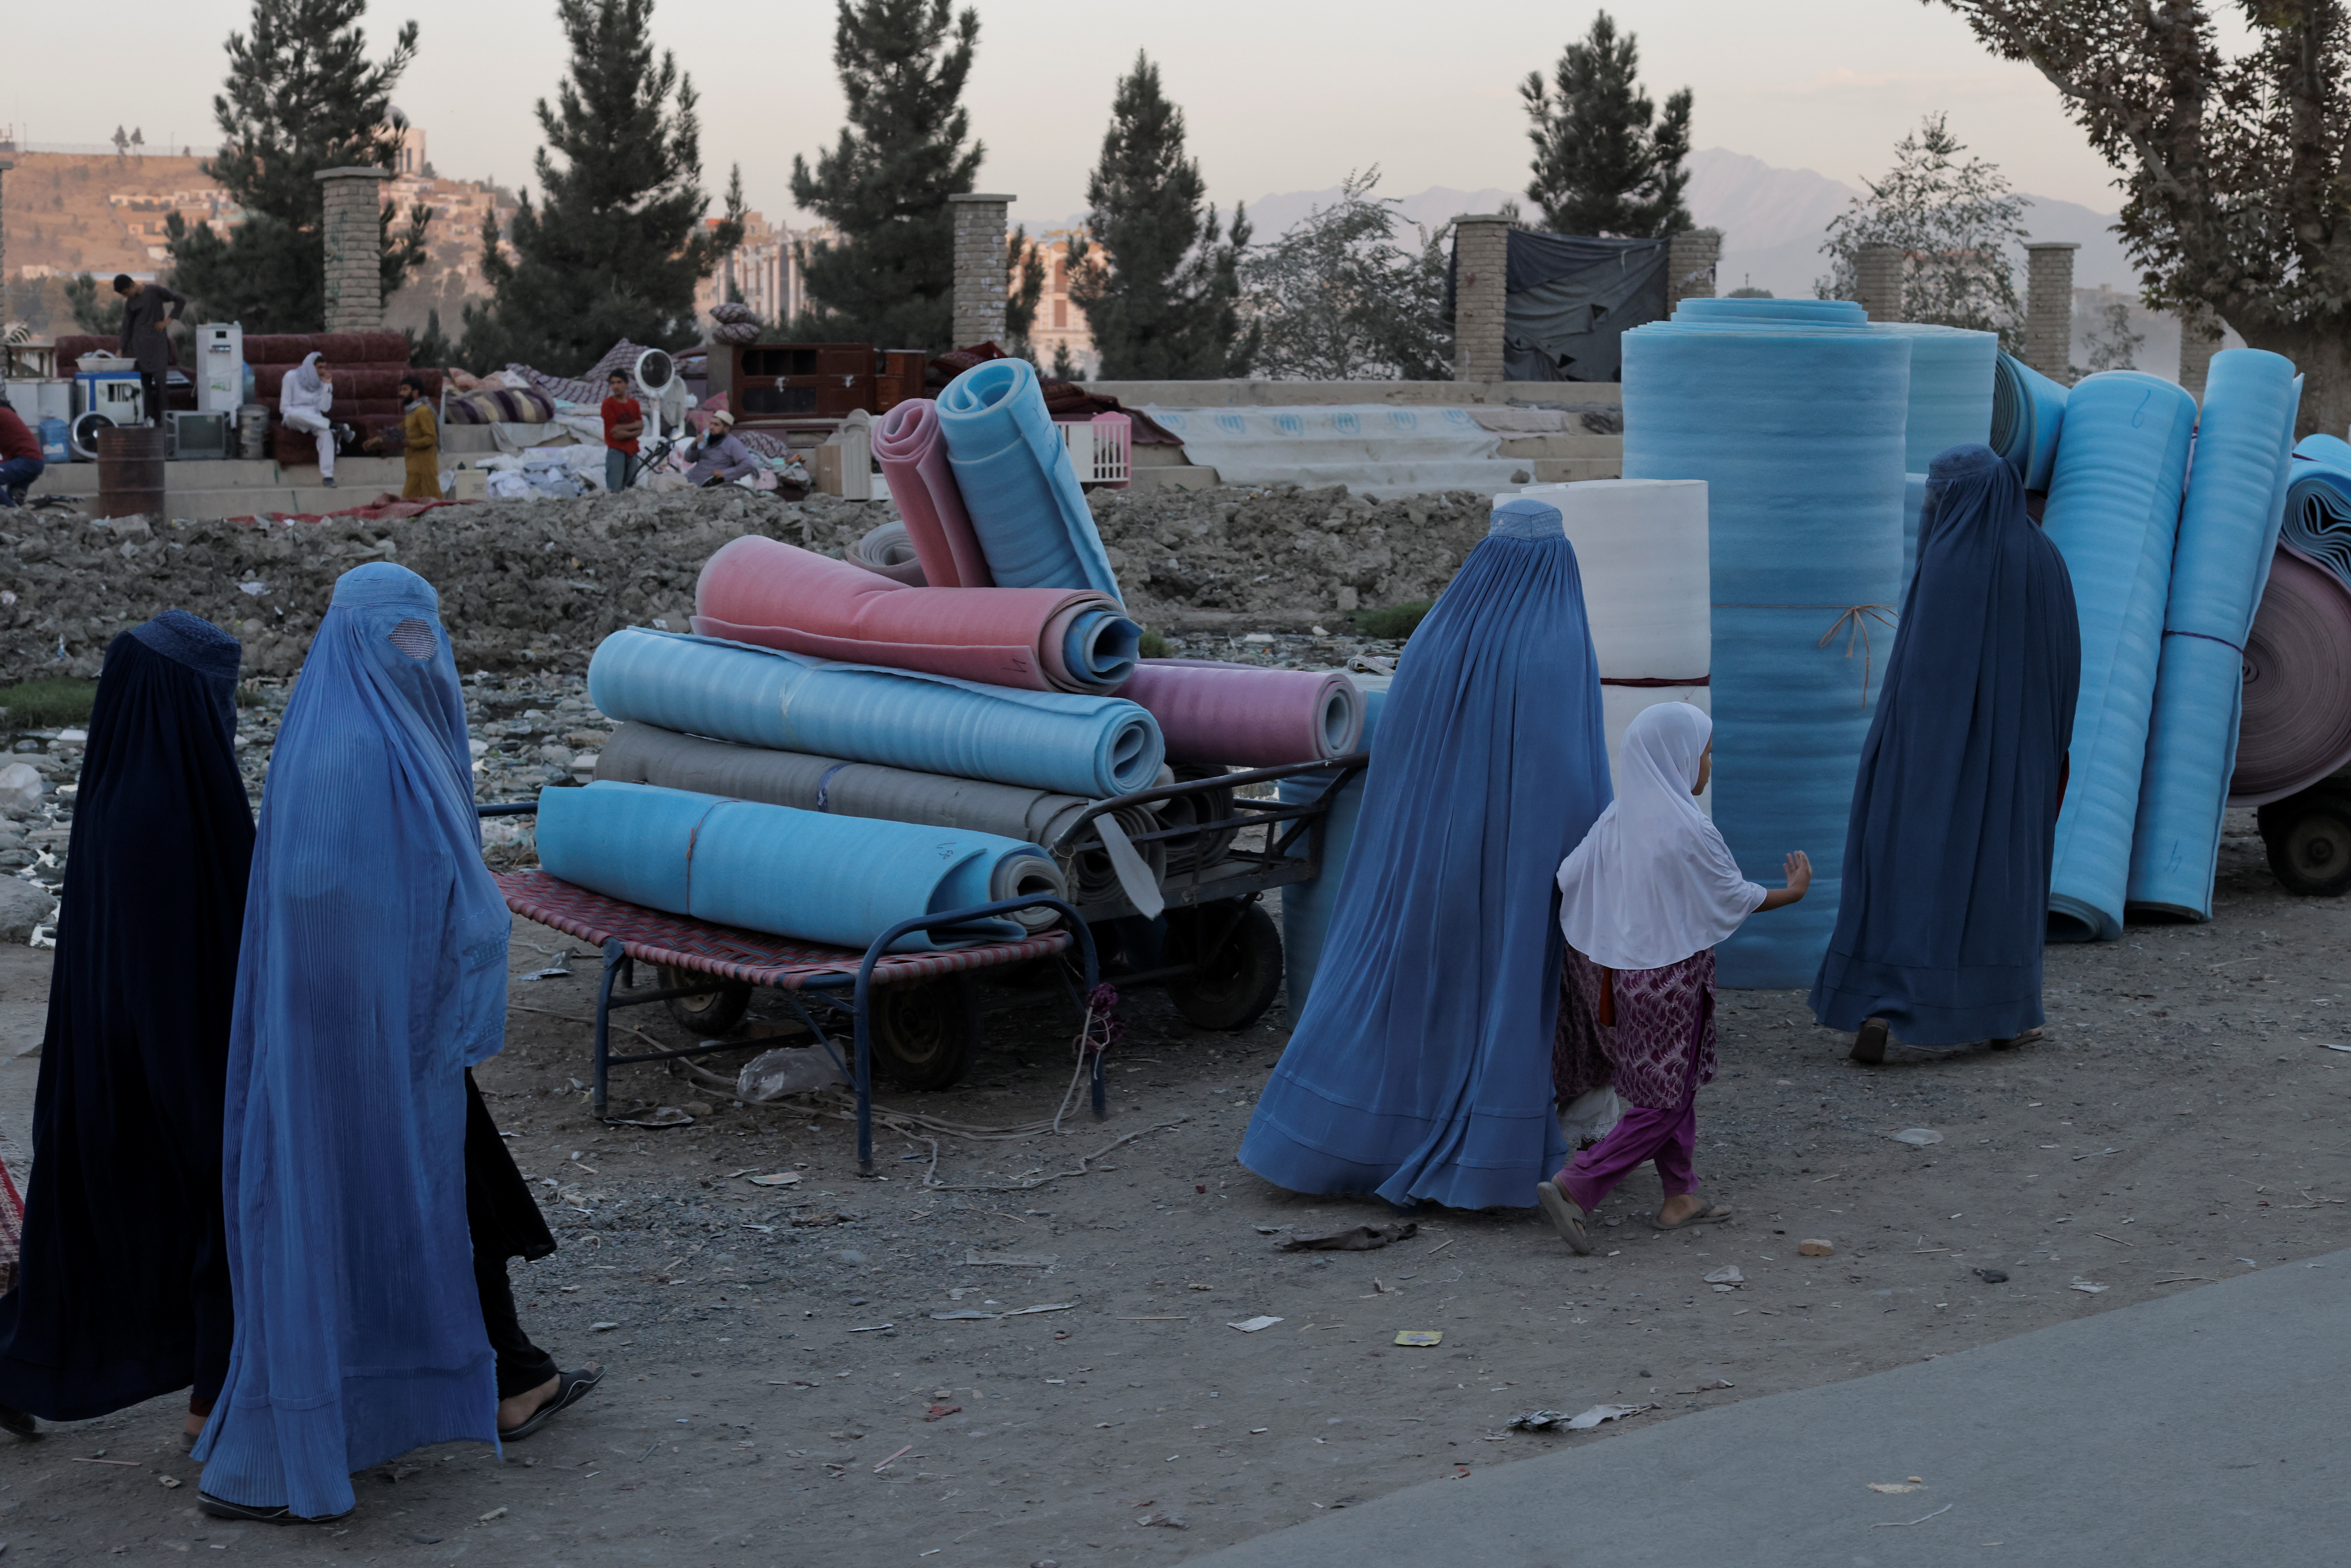 Women wearing burqas walk in a second-hand market where people sell their home appliances and other belongings in Kabul